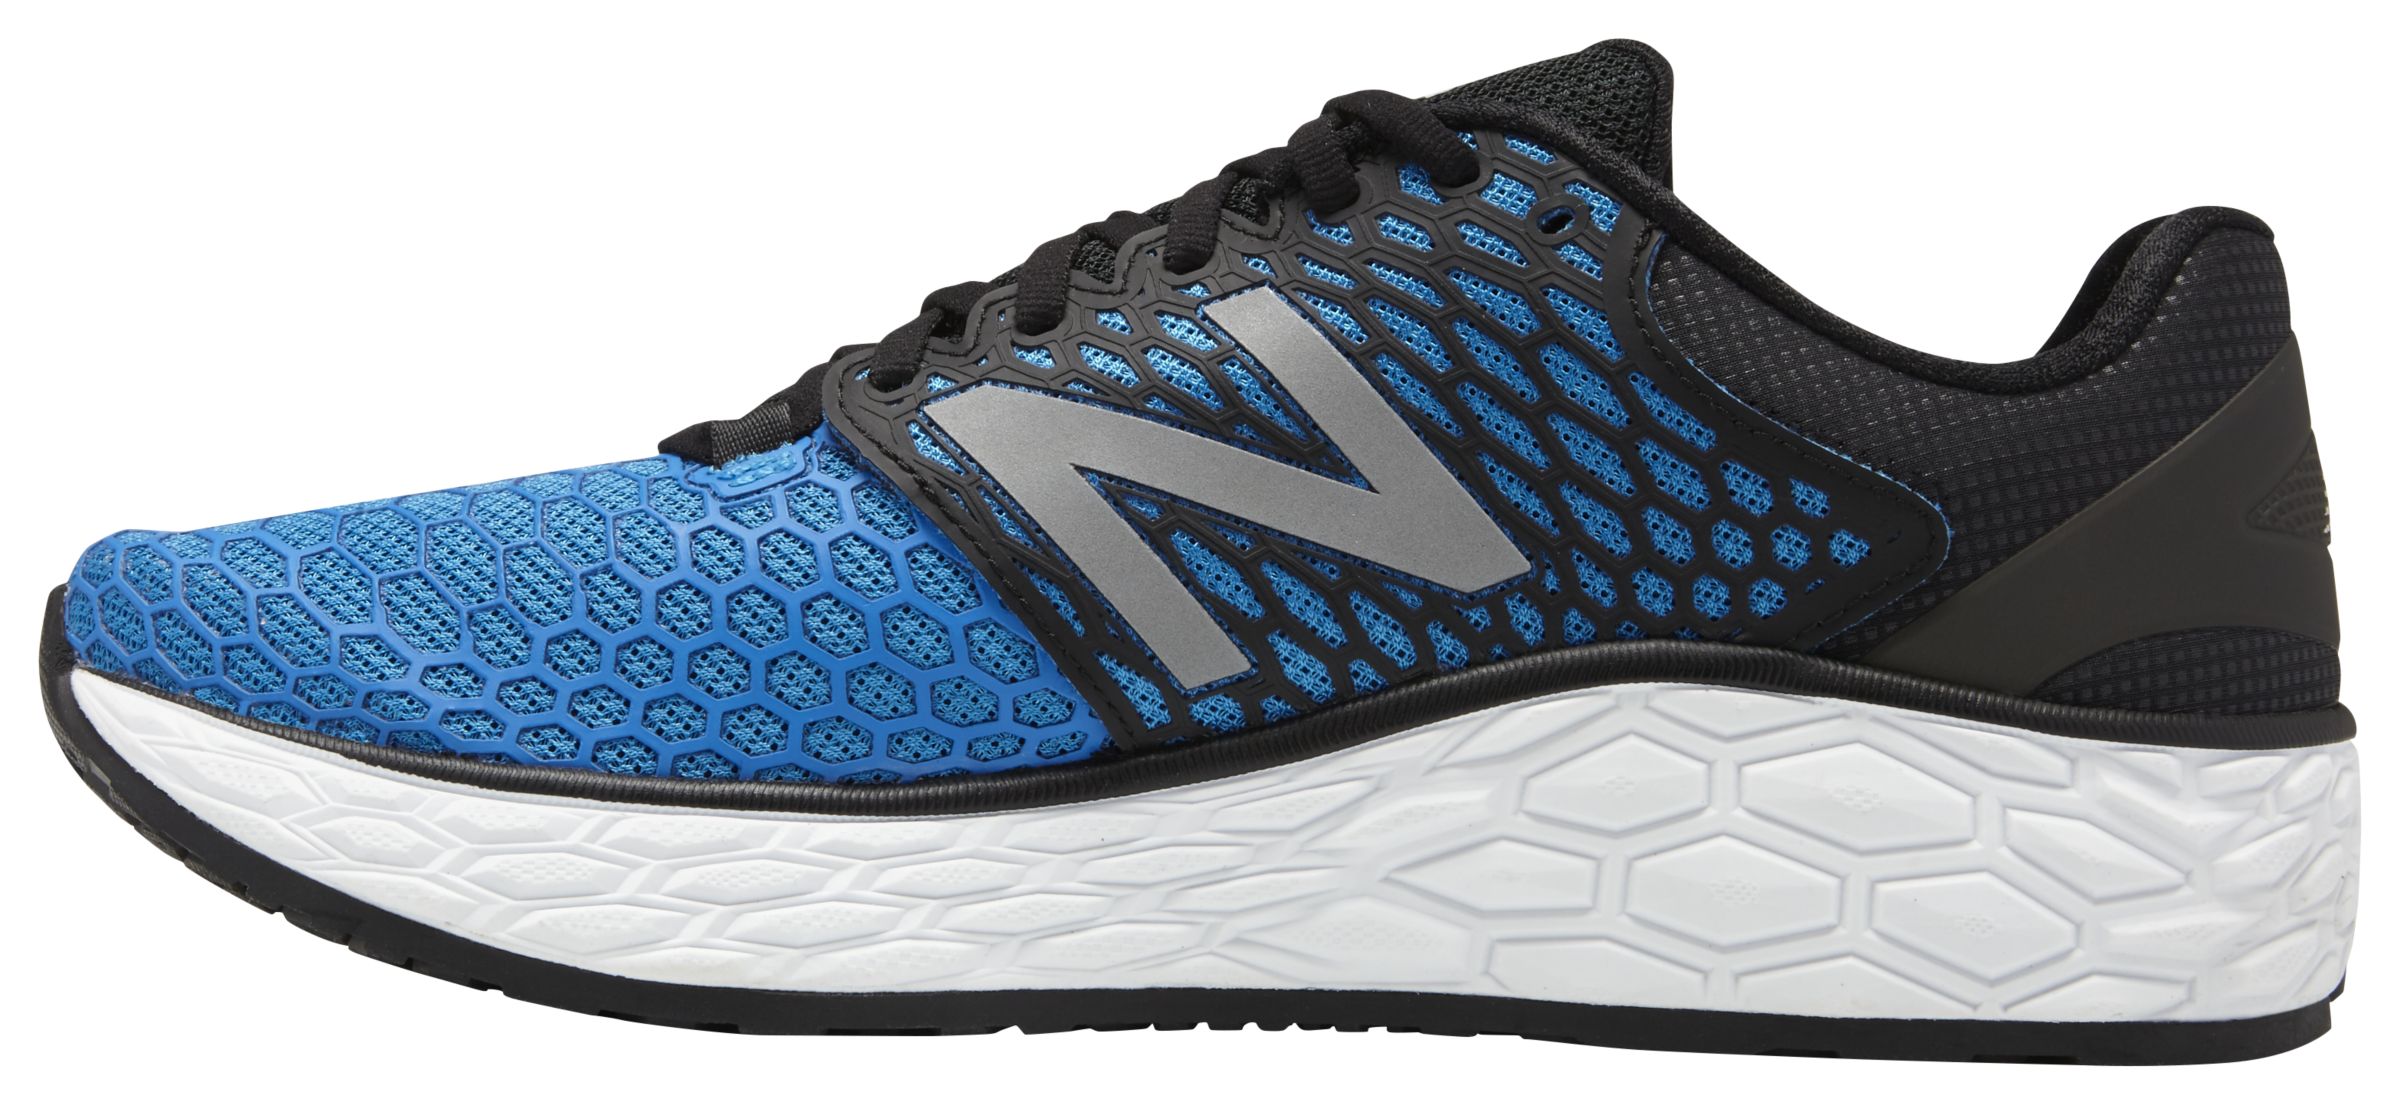 Off on MVNGOLB3 at Joe's New Balance Outlet